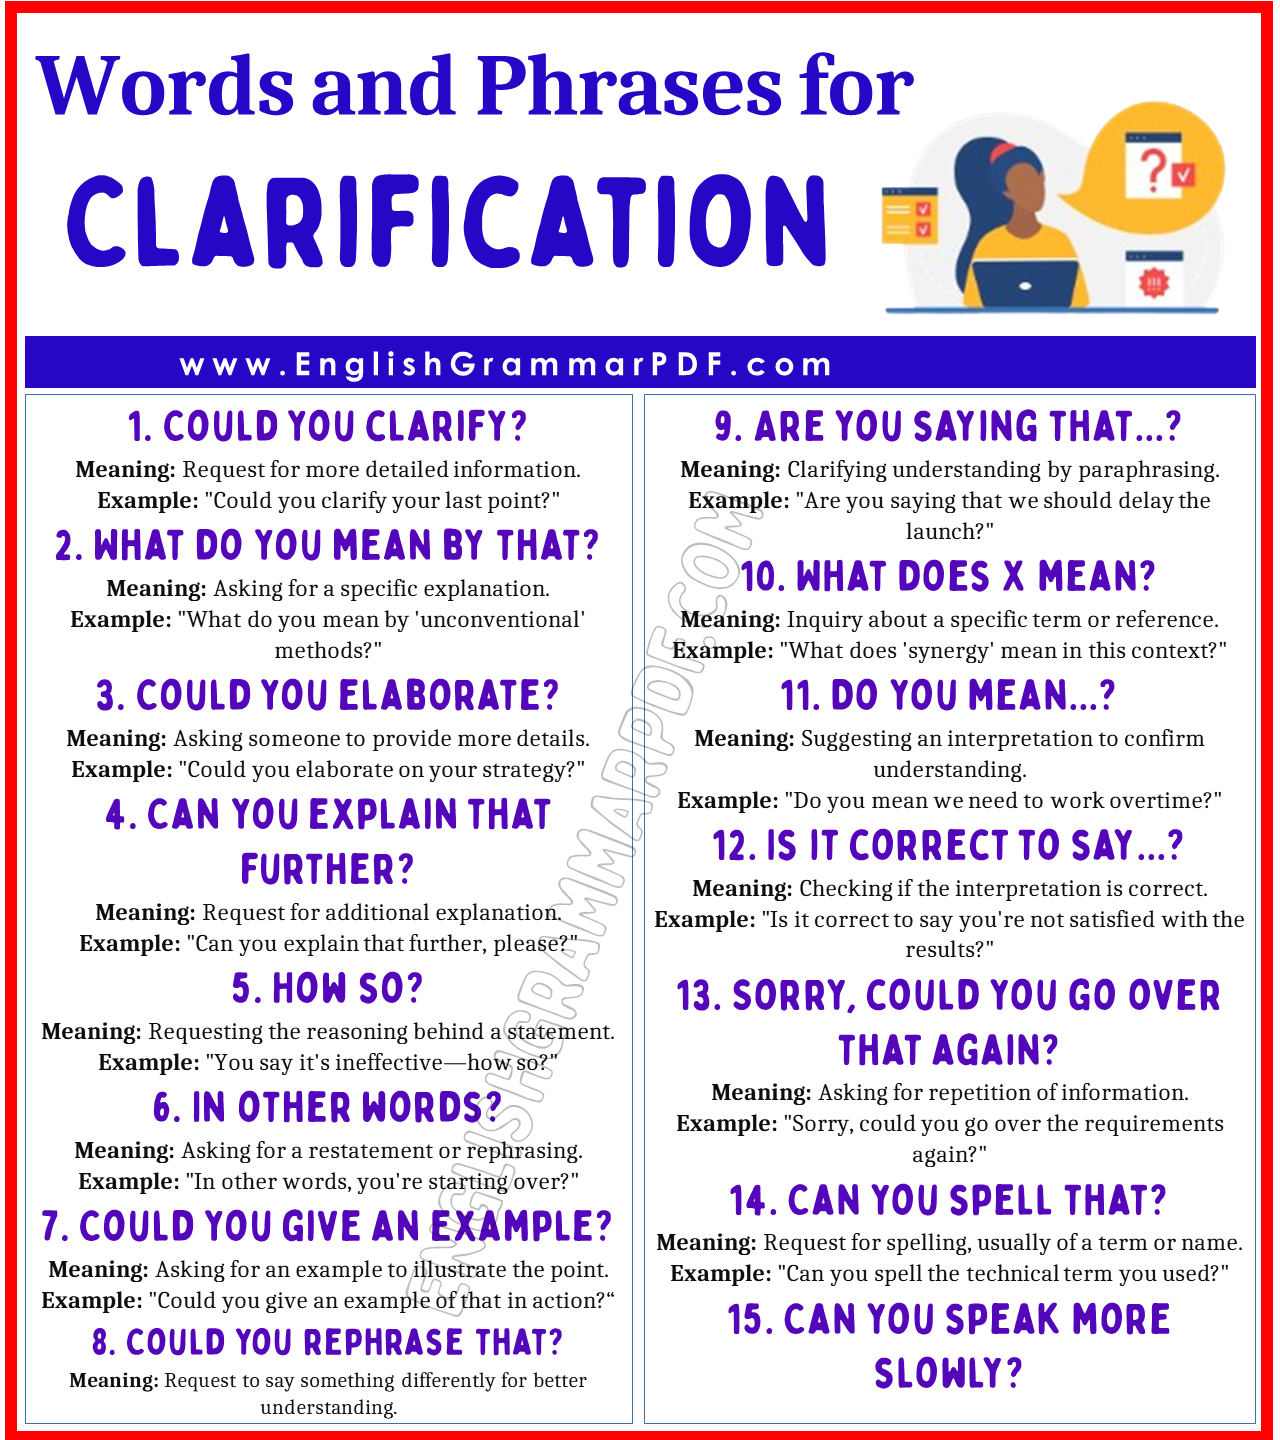 Words and Phrases to Use for Clarification